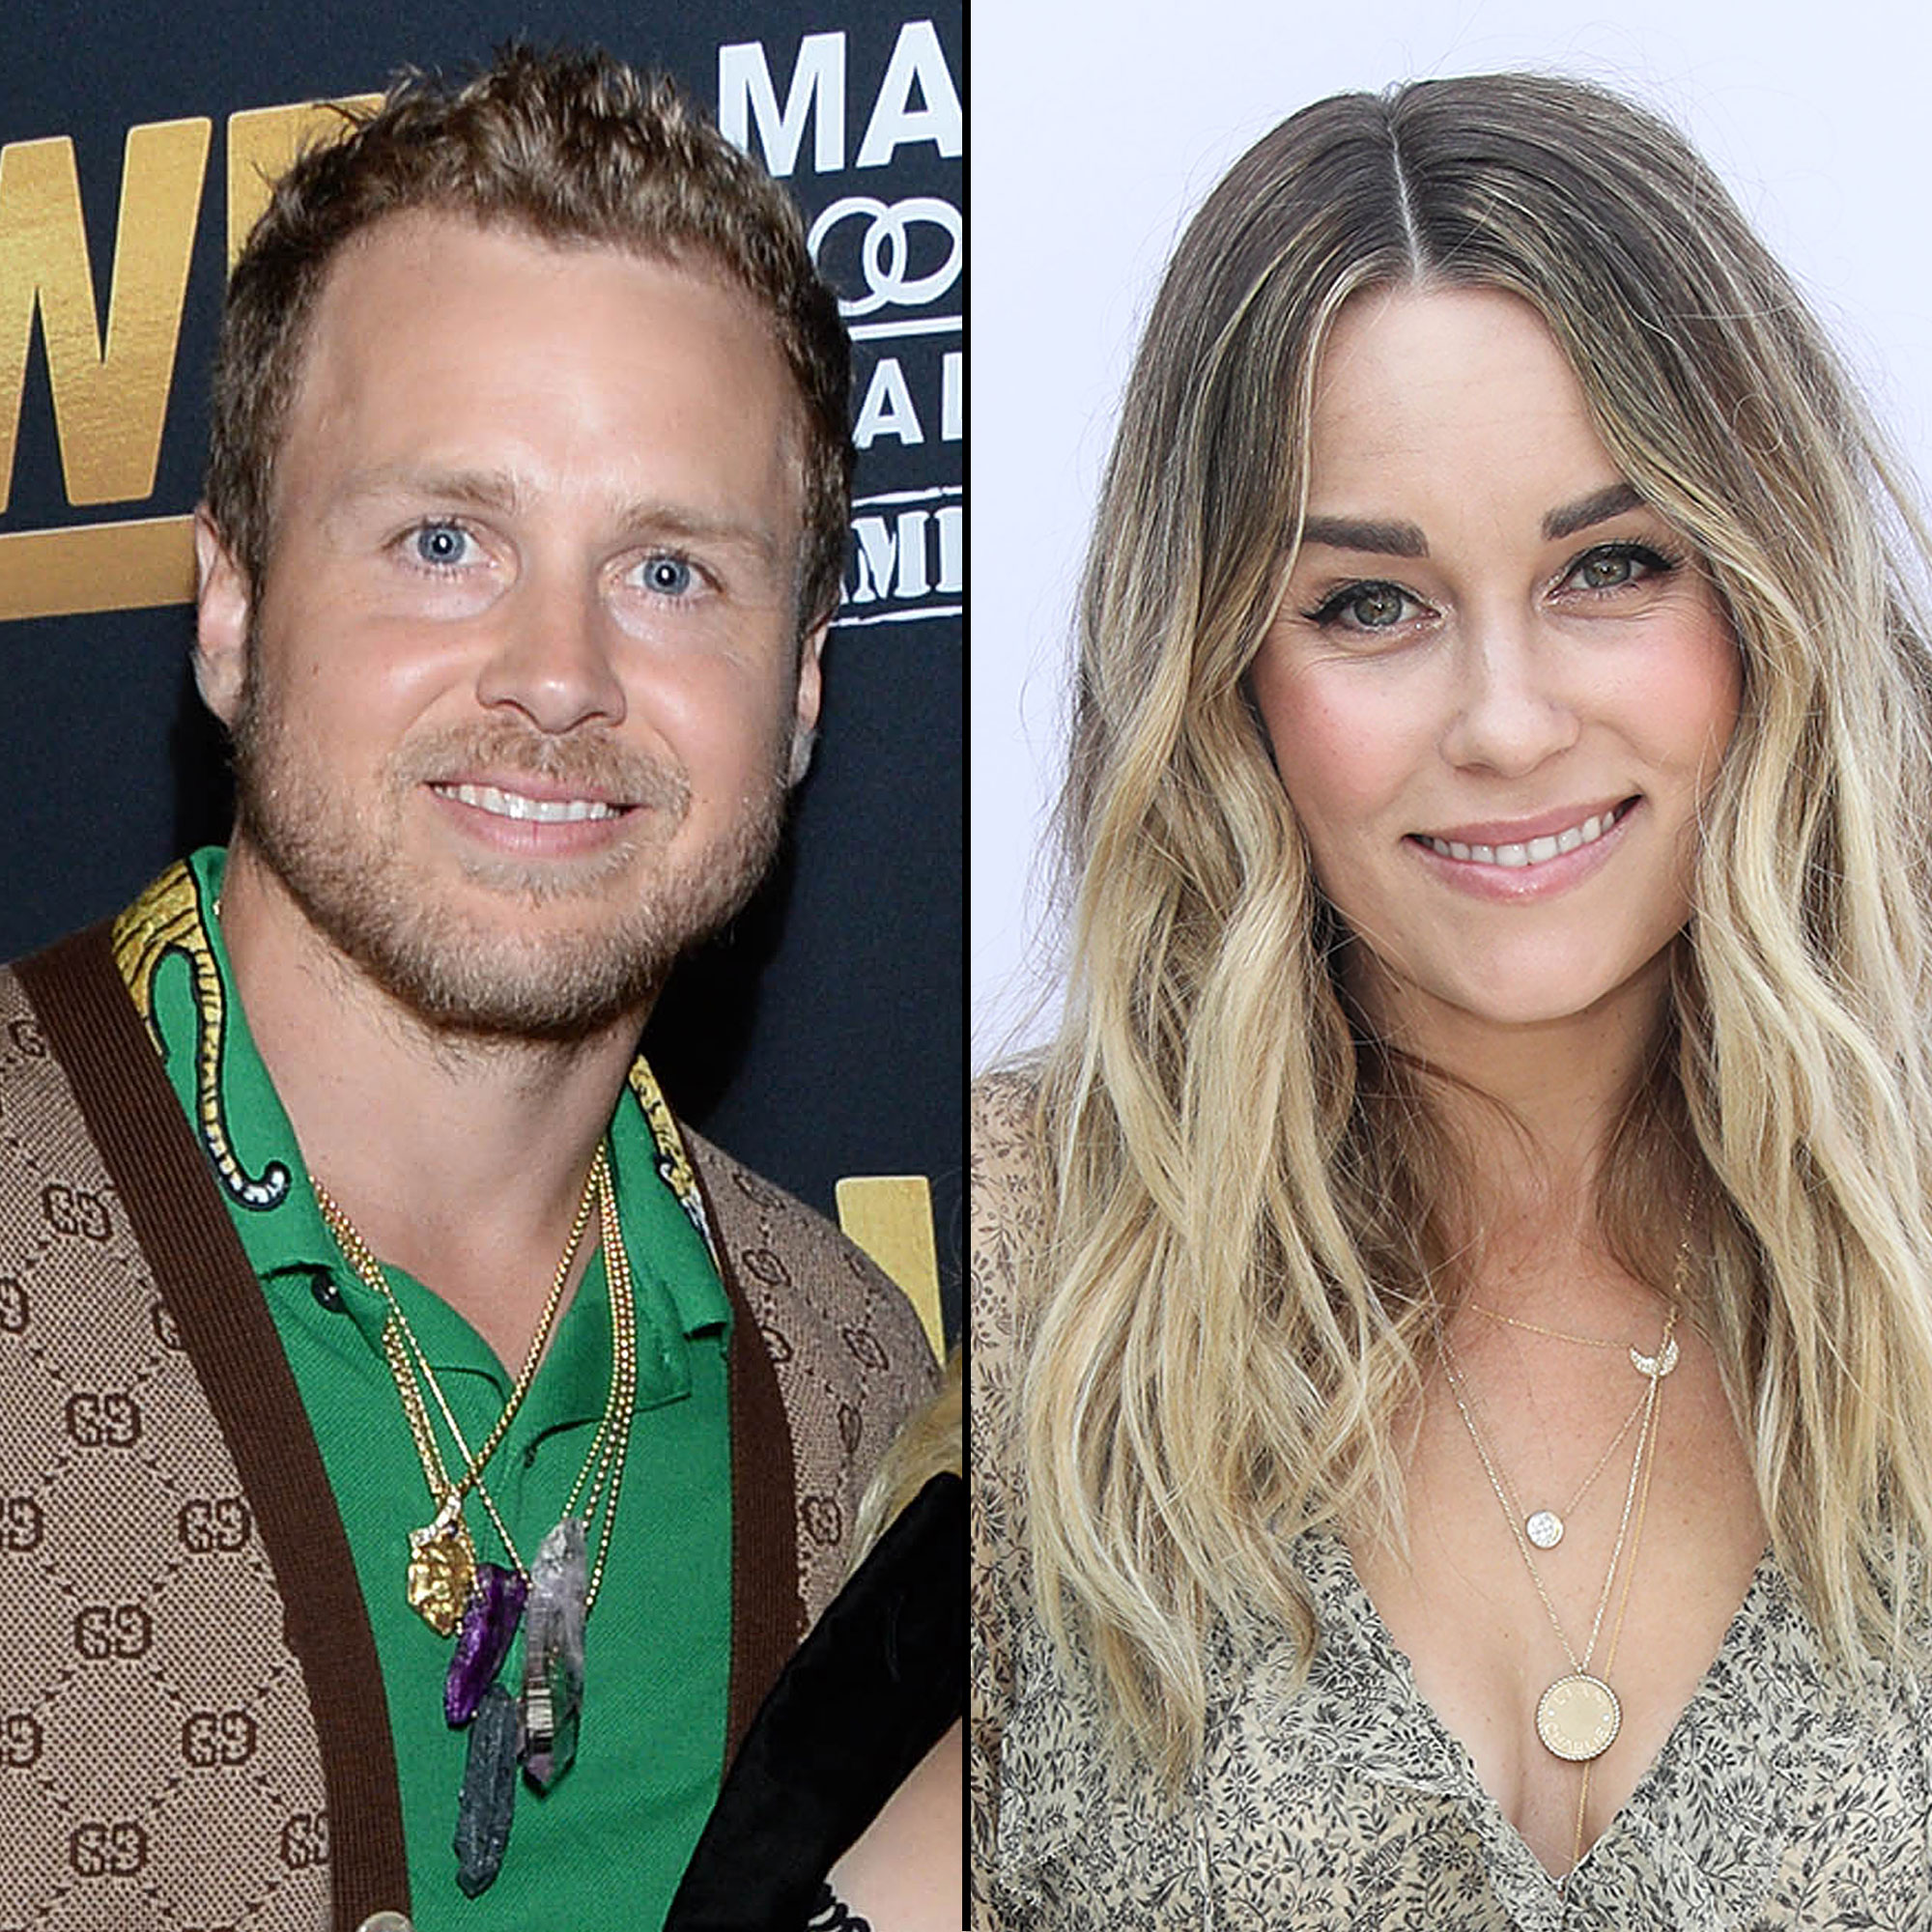 Spencer Pratt Doesn't Think Lauren Conrad 'Would Add' to 'The Hills